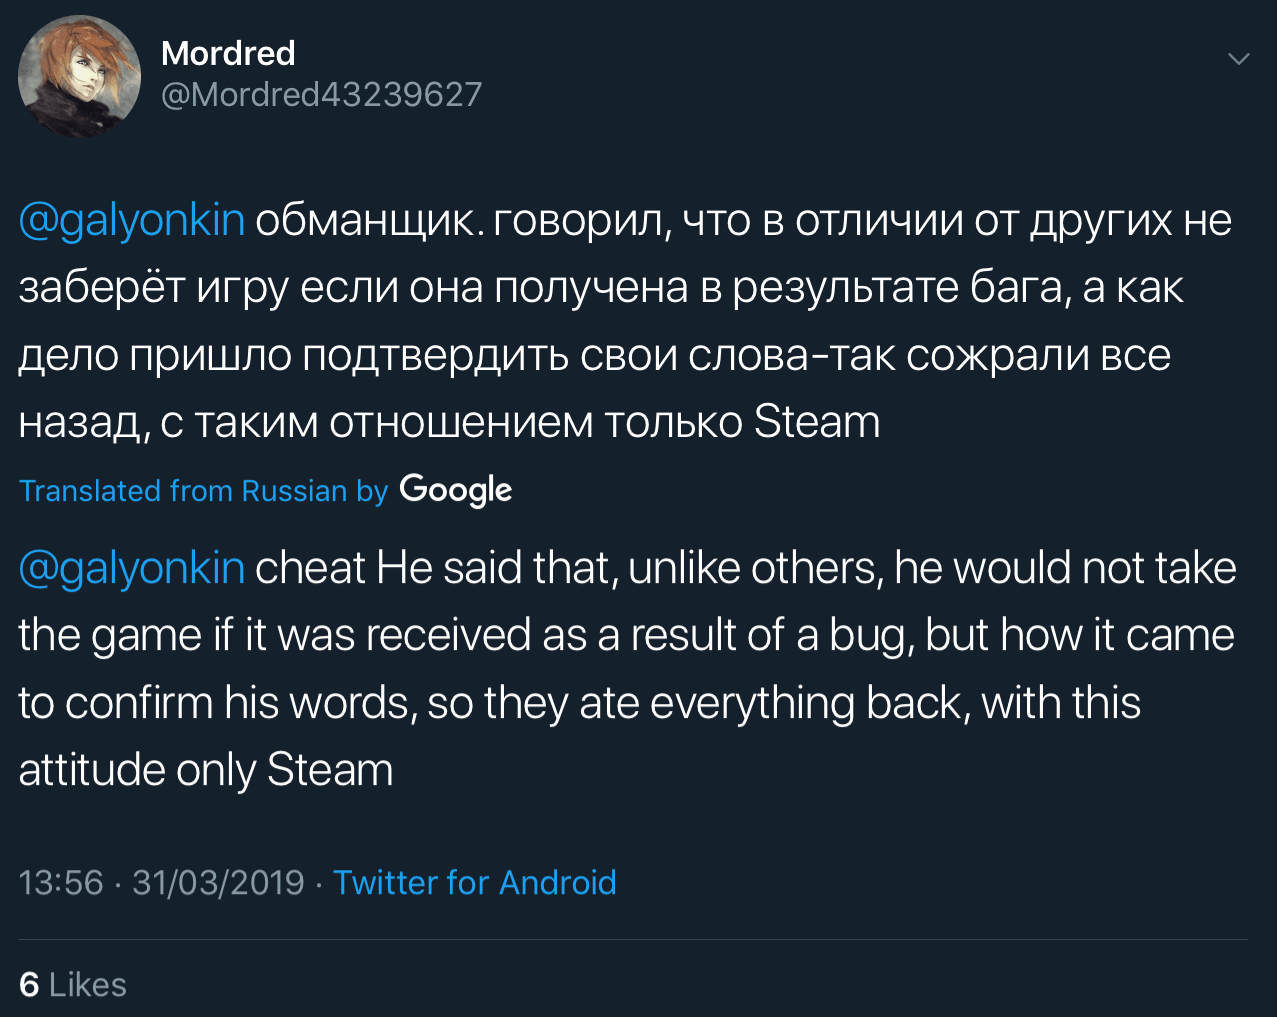 A Twitter user highlighting how Sergey Galyonkin said he would not take back games that were received as a result of a bug yet this is what Epic Games are doing with Detroit become human.